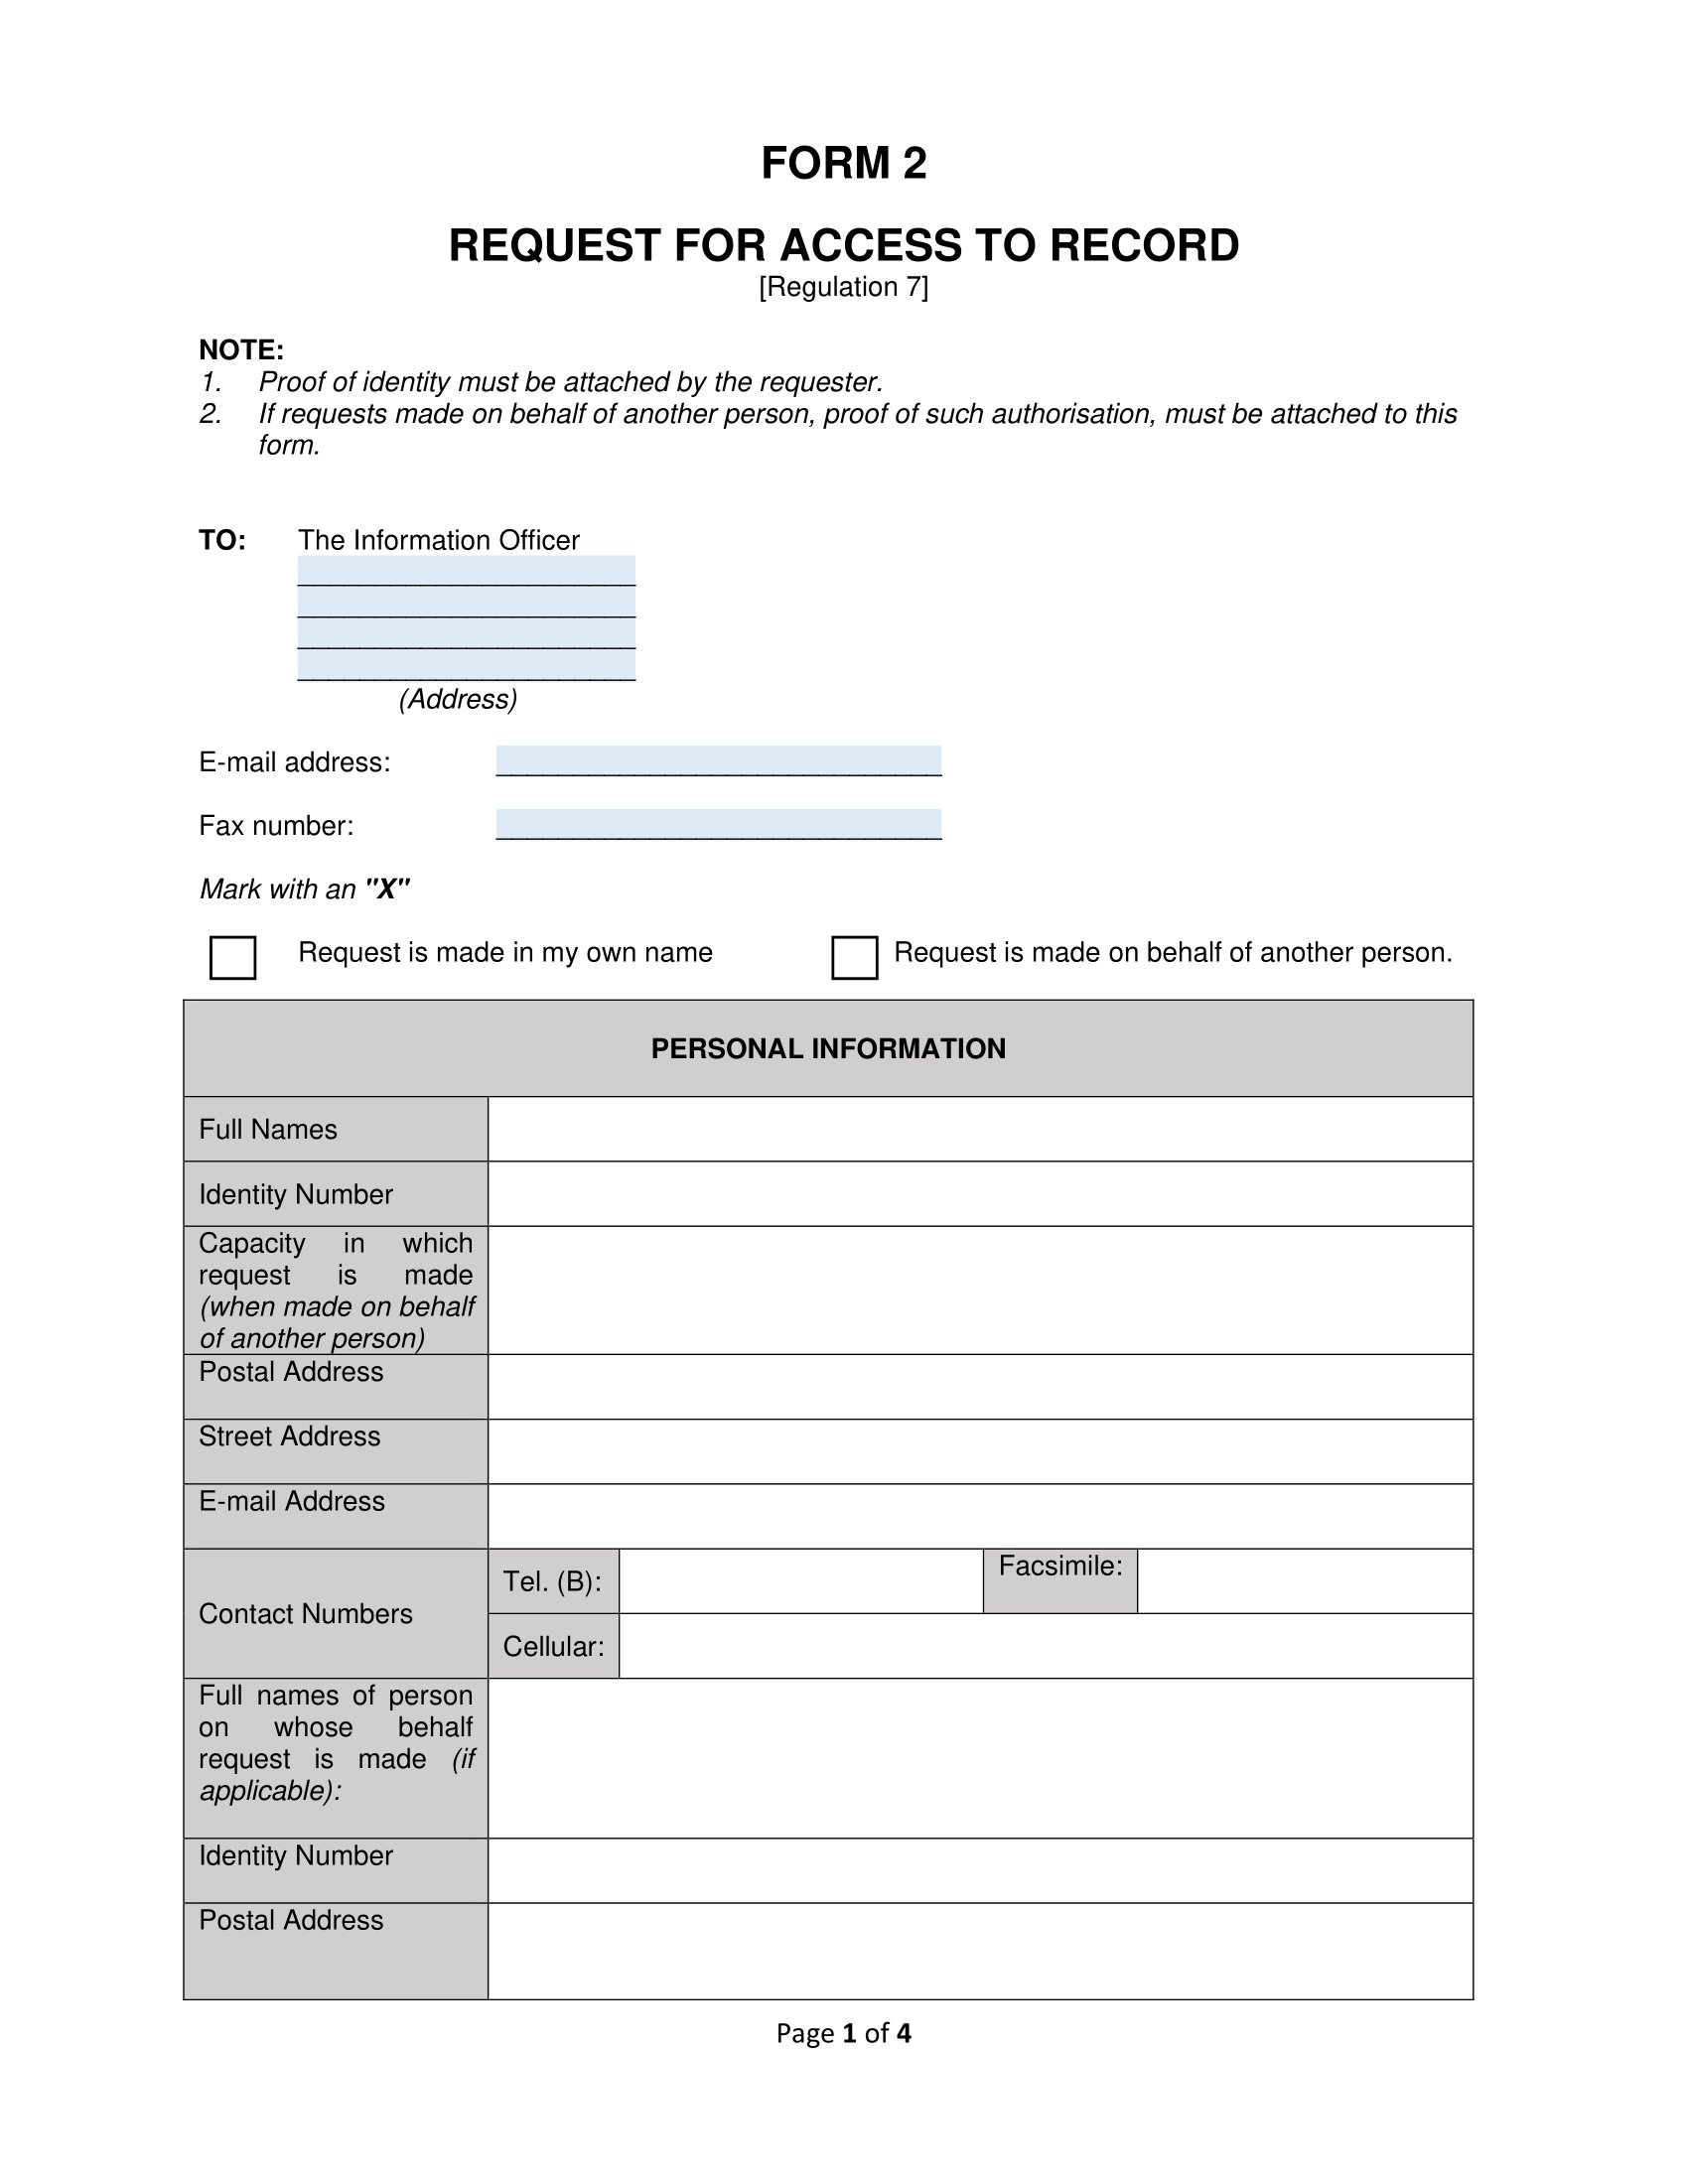 Form 2 - Request for access to a Record